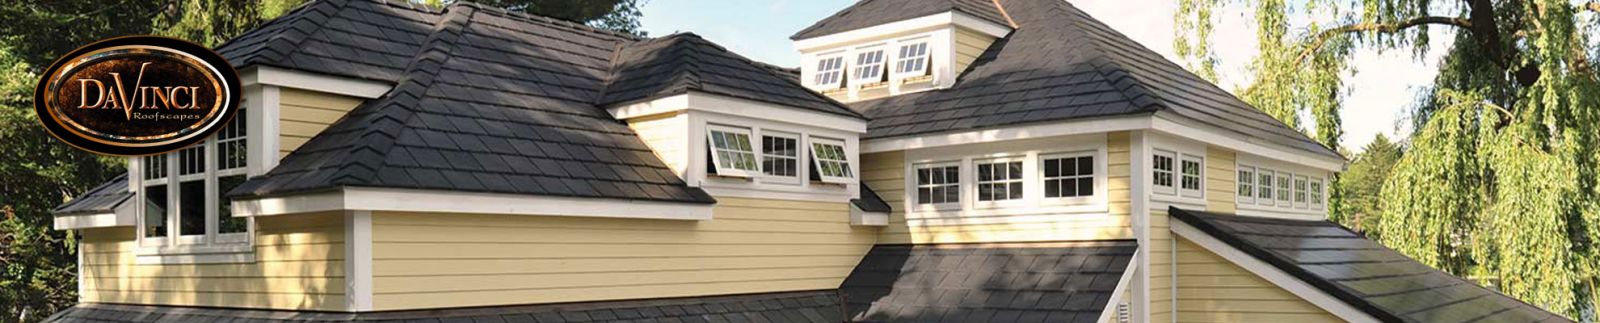 Abraham Roofing & Siding Images